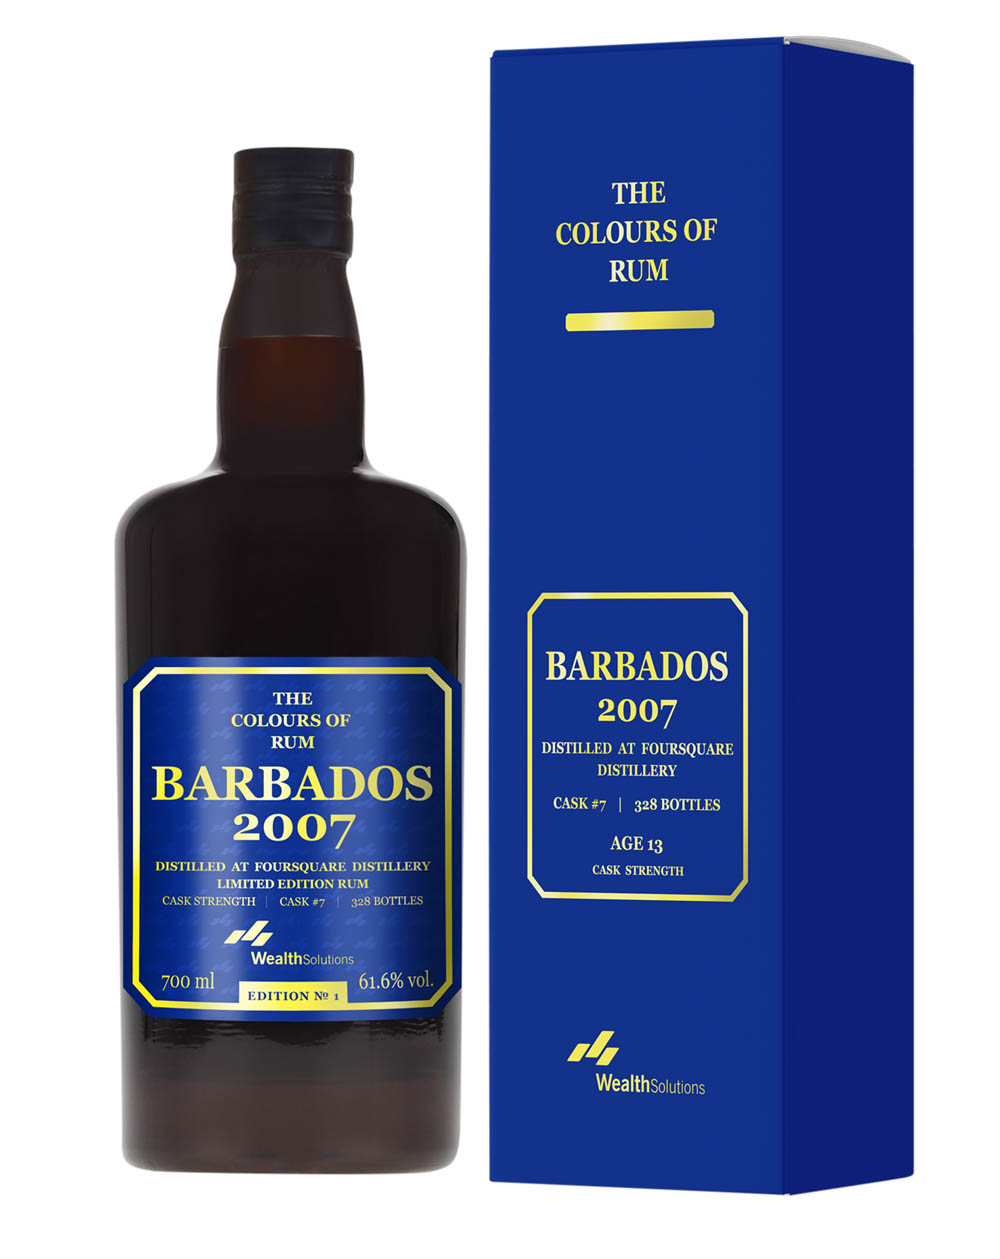 Foursquare Barbados 2007 The Colours Of Rum Edition 1 Box Musthave Malts MHM